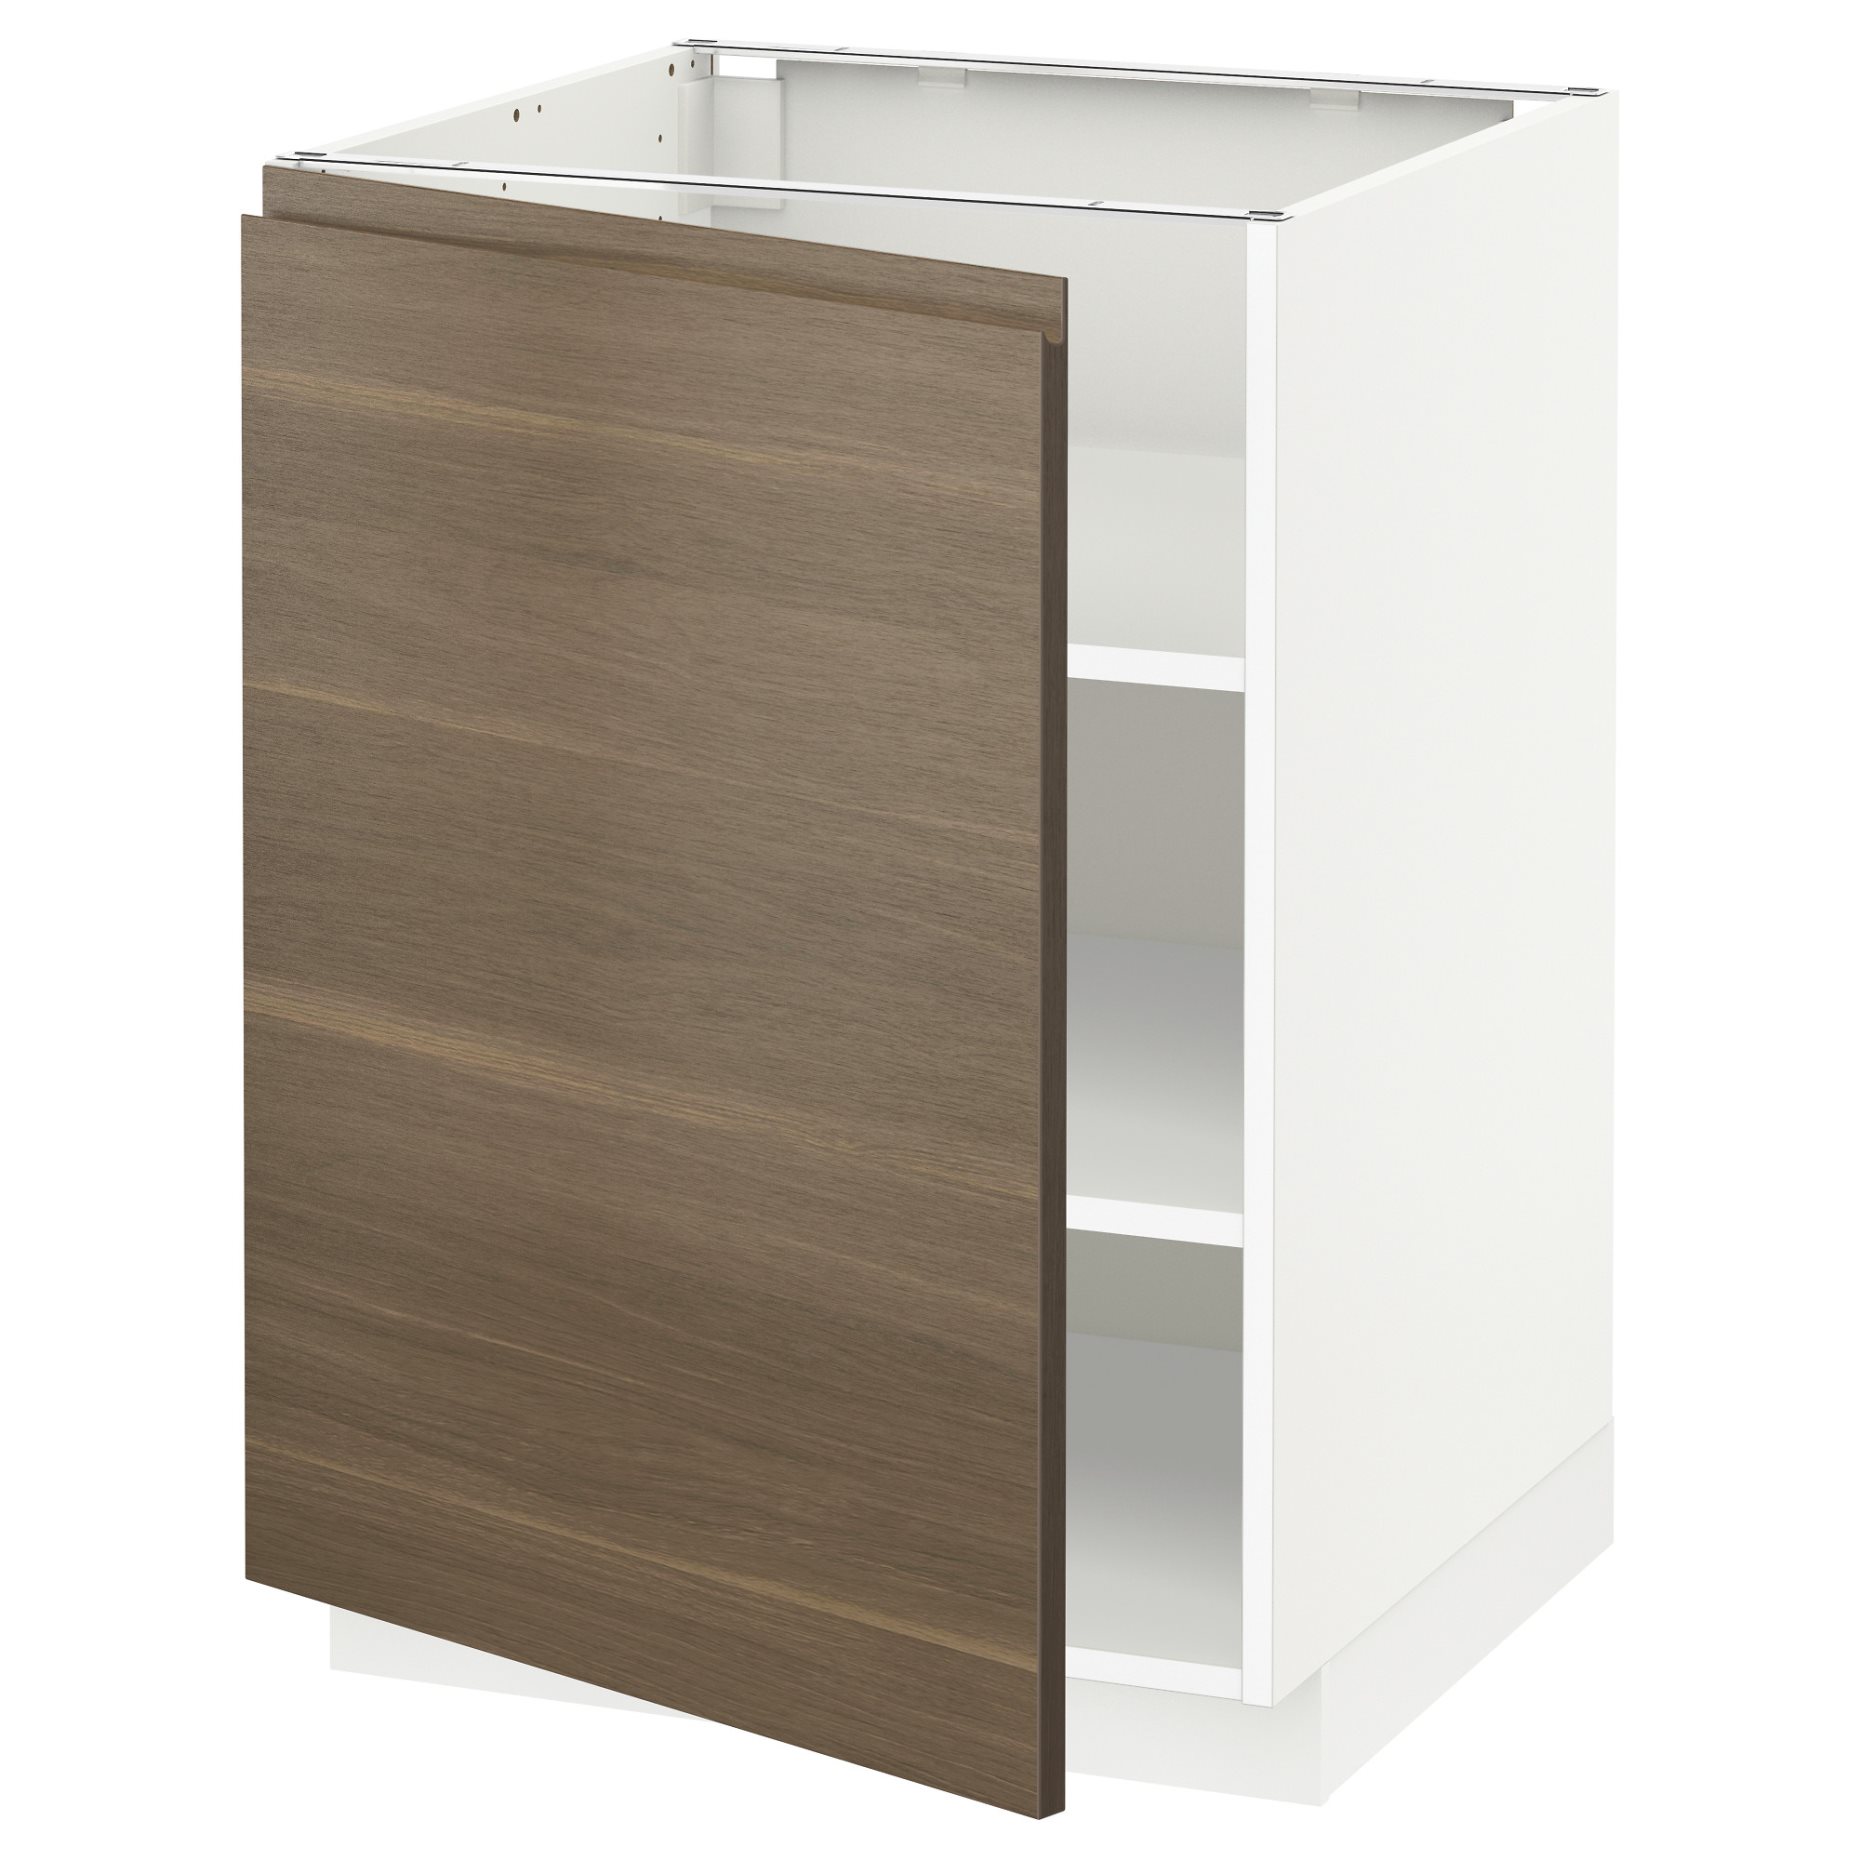 METOD base cabinet with shelves, 60x60 cm 59458450 | IKEA Cyprus